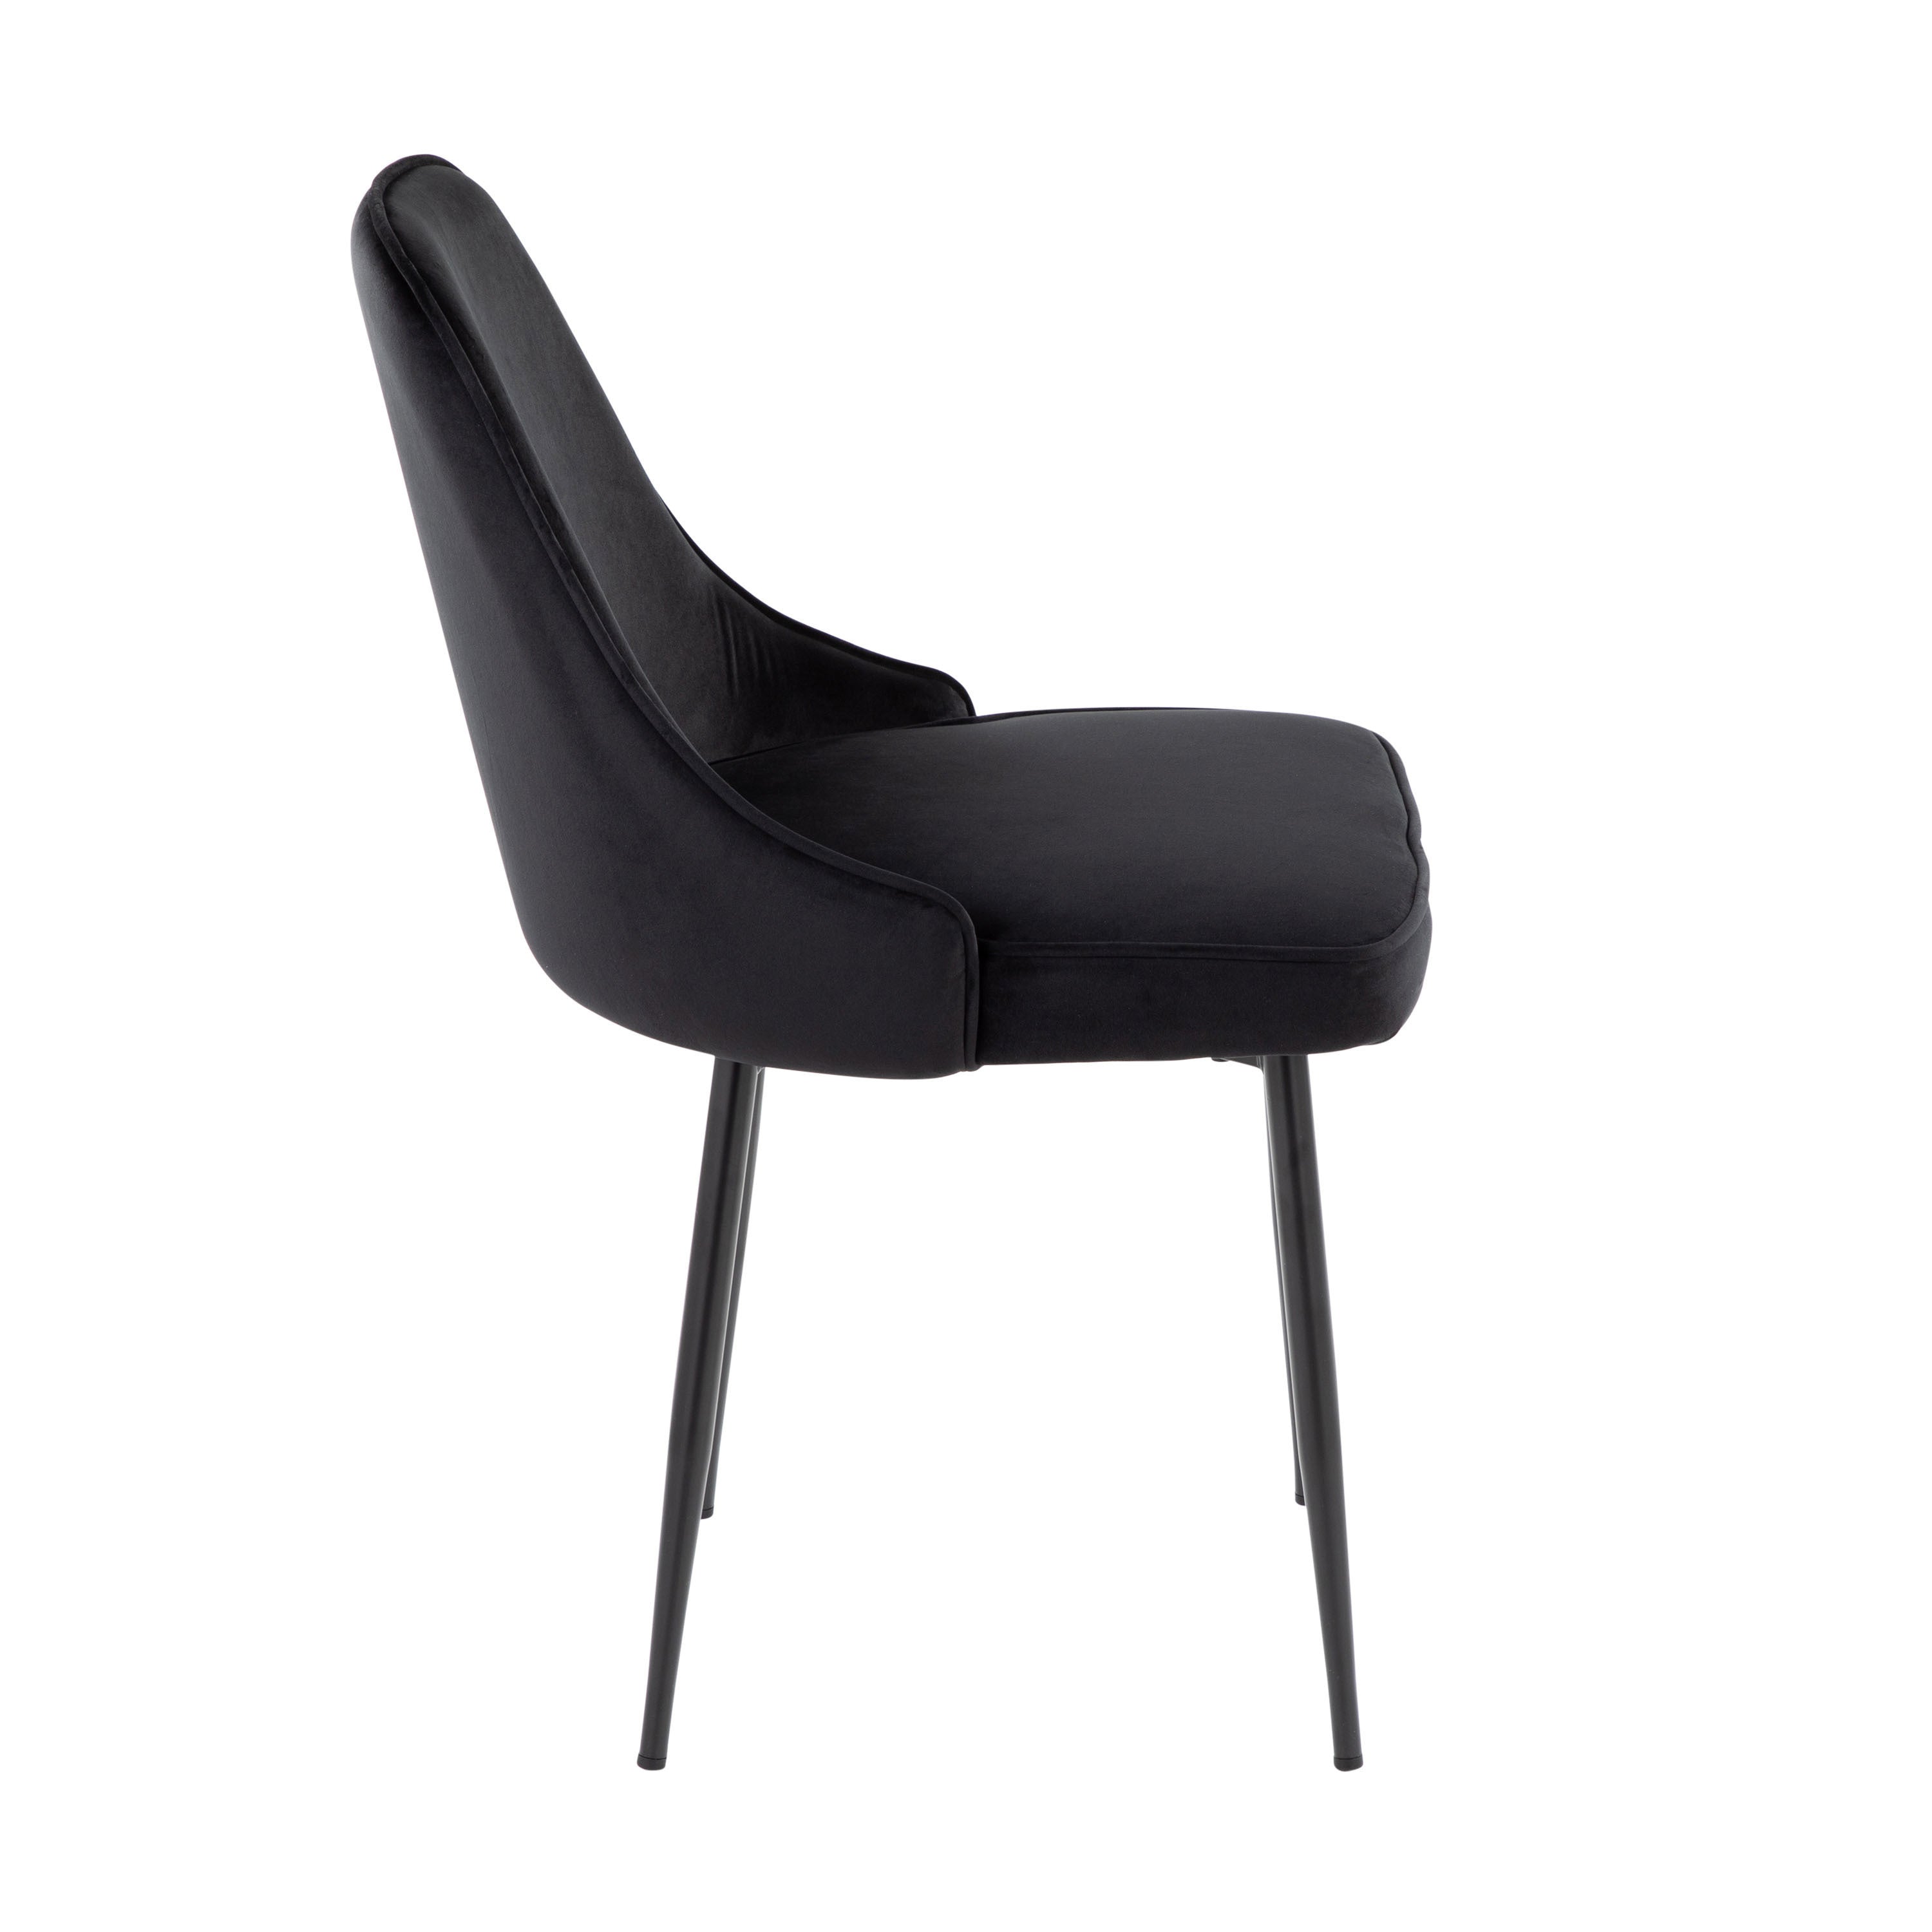 Contemporary Dining Chair with Black Frame and Black Velvet Fabric (Set of 2)